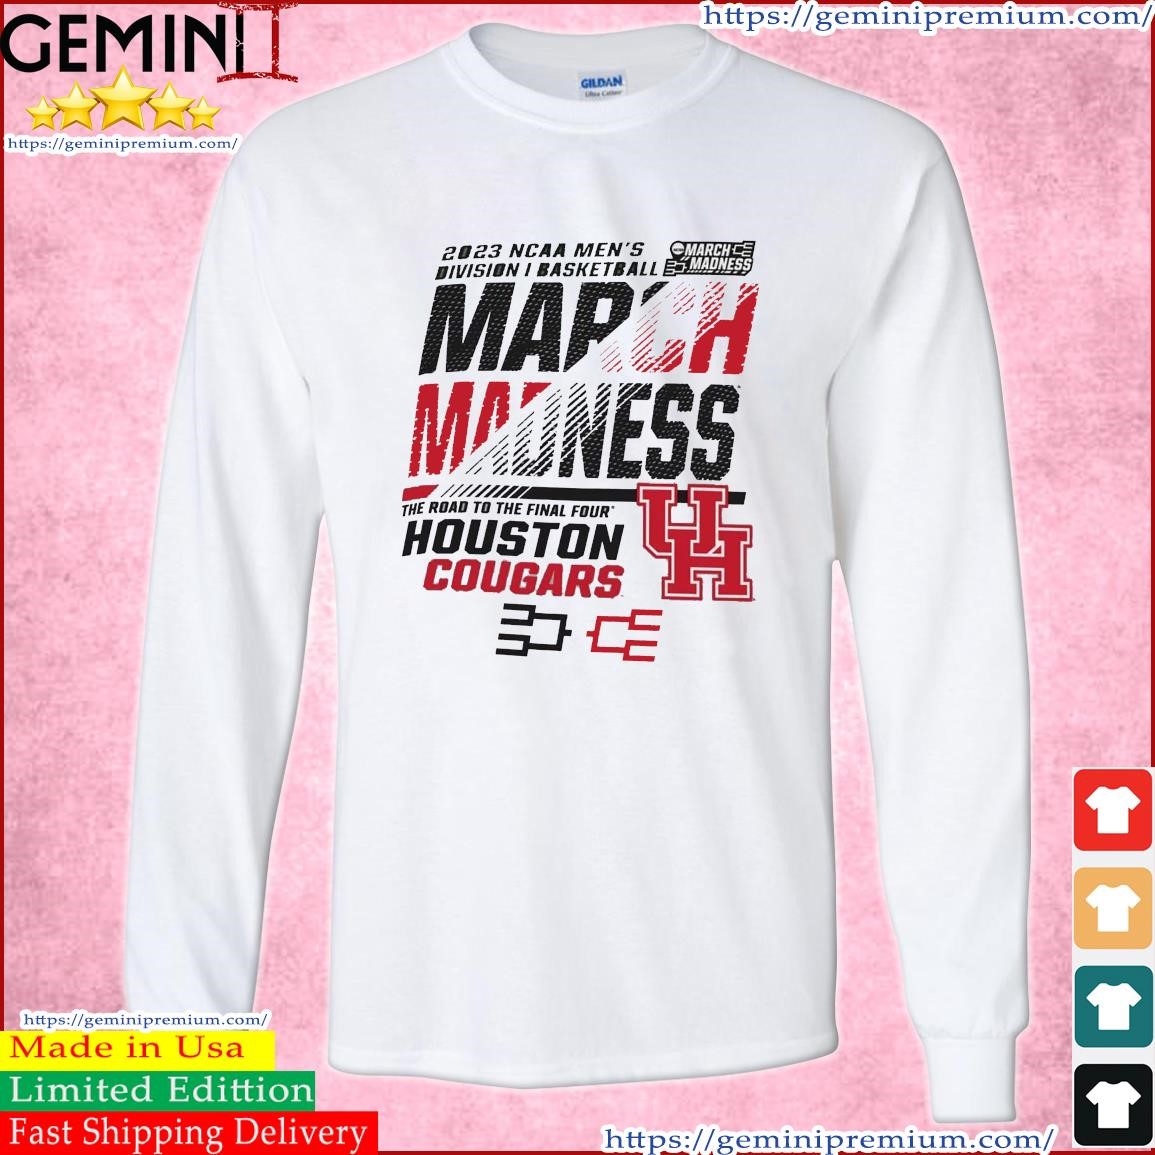 Houston Cougars Men's Basketball 2023 NCAA March Madness The Road To Final Four Shirt Long Sleeve Tee.jpg